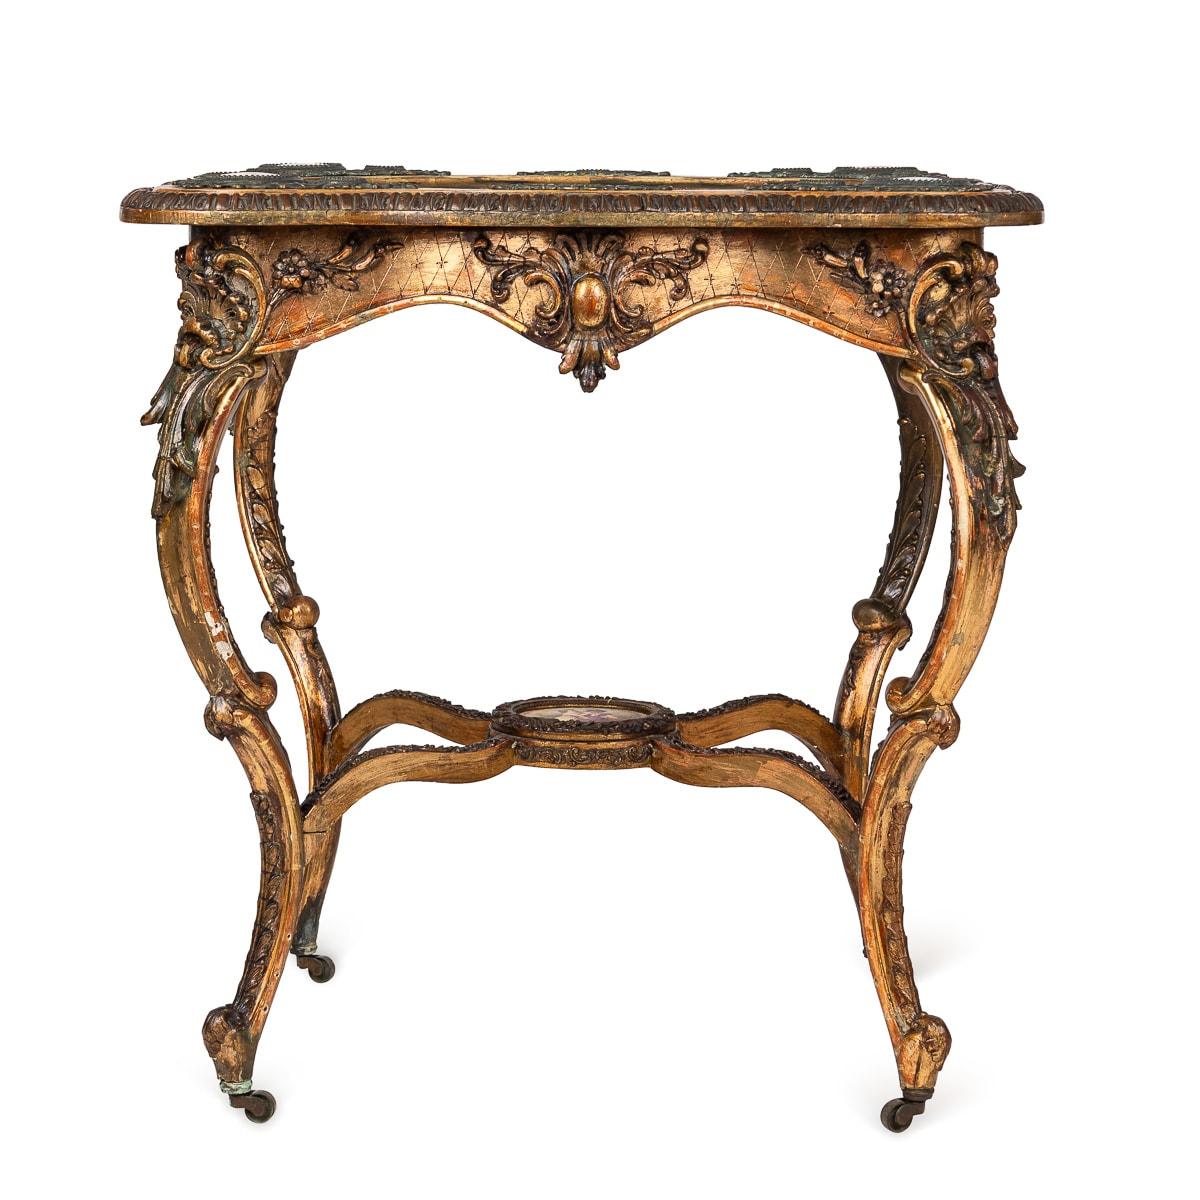 Antique 19th Century French giltwood table, crafted in the opulent Louis XV style, showcasing superb Vienna porcelain plaques. The central tray features a depiction of an aristocratic courting scene, while additional plaques adorned with classically